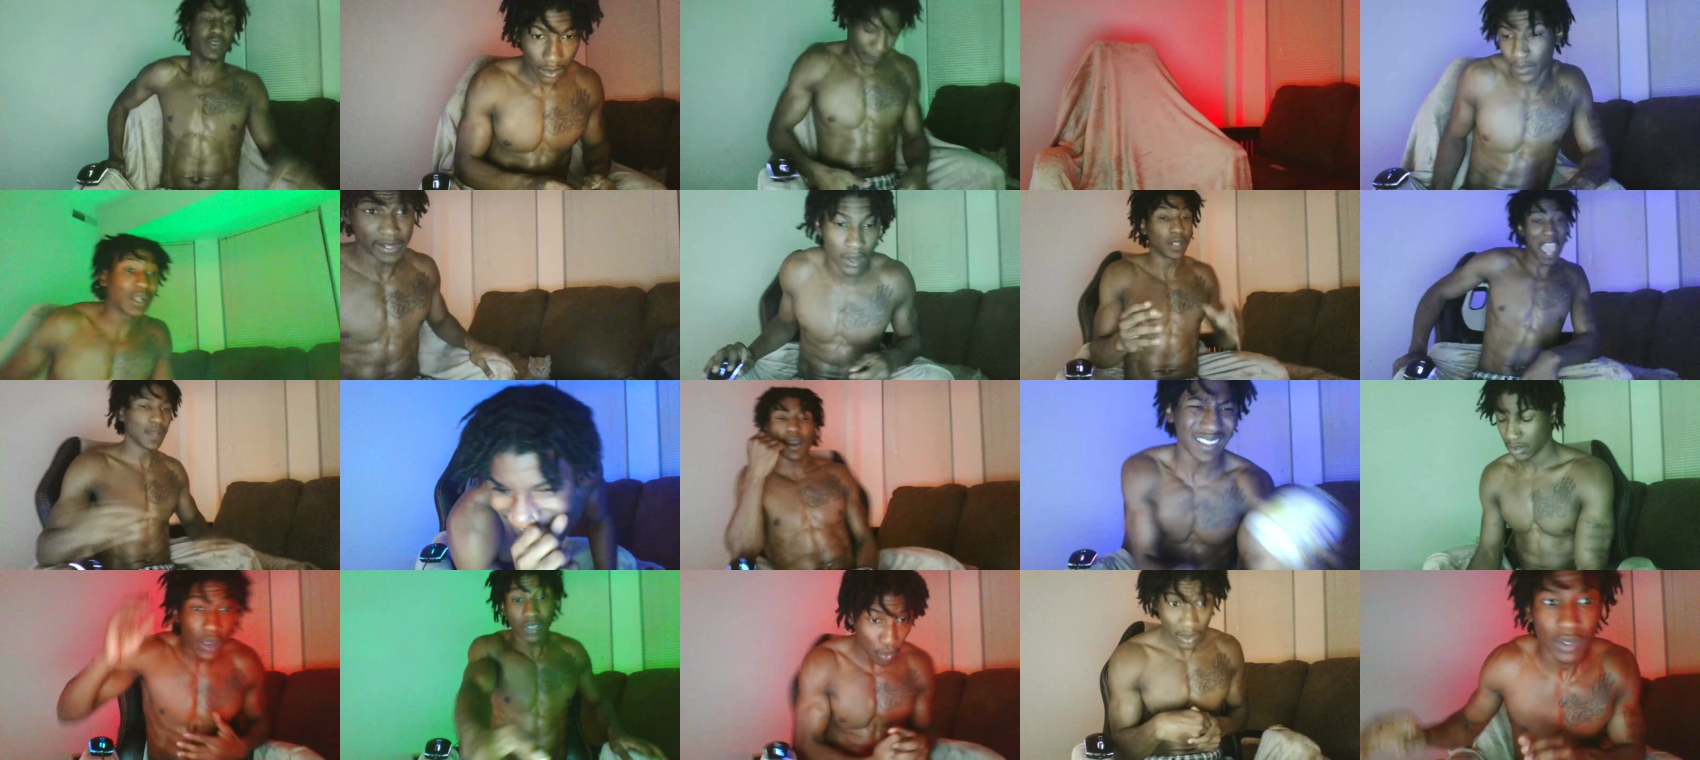 theeuglydude  26-10-2022 Males Topless